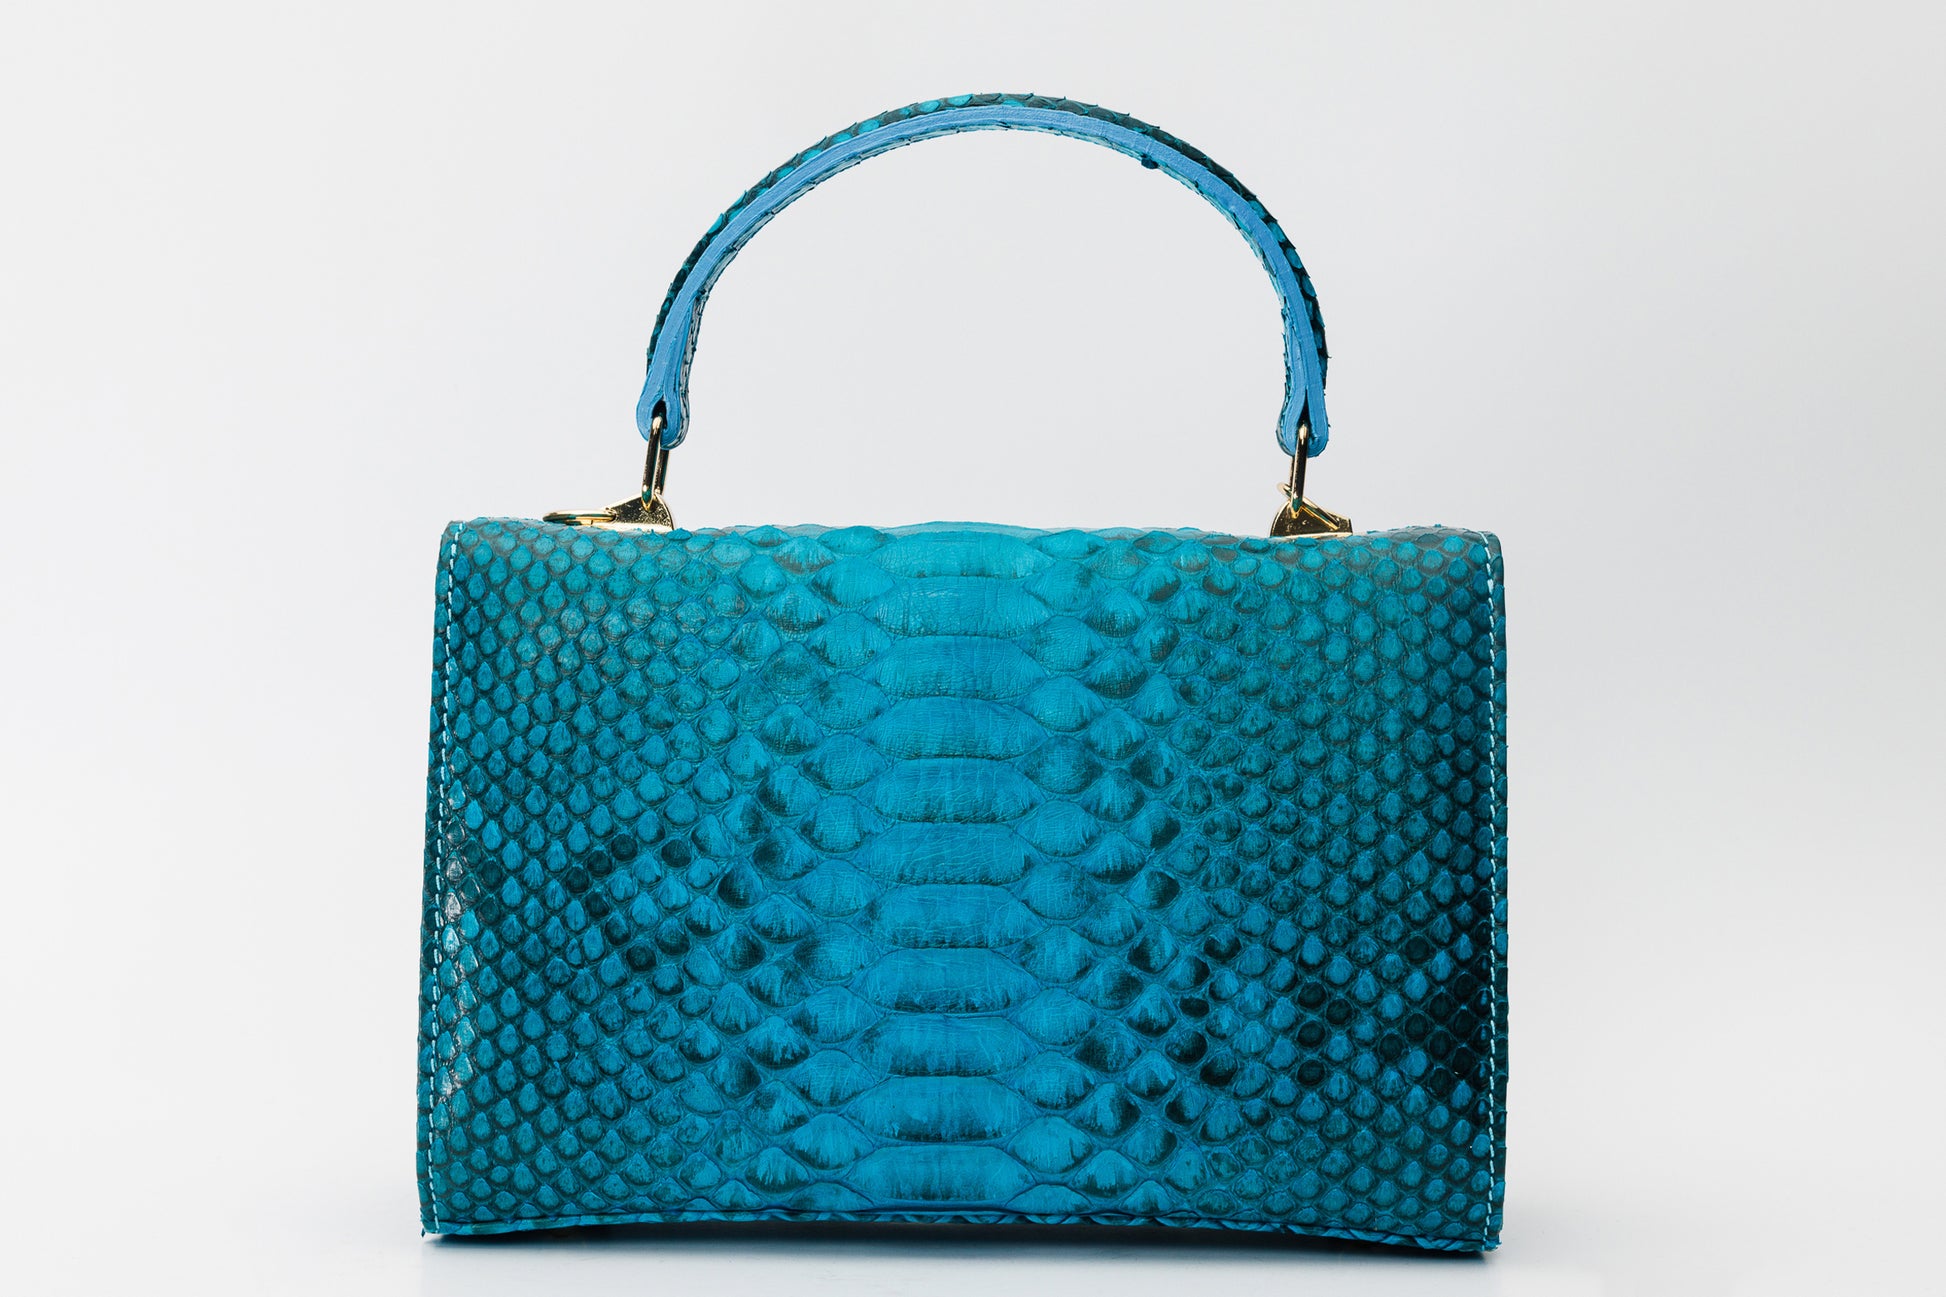 The Queen Turquoise Leather Handbag – Vinci Leather Shoes